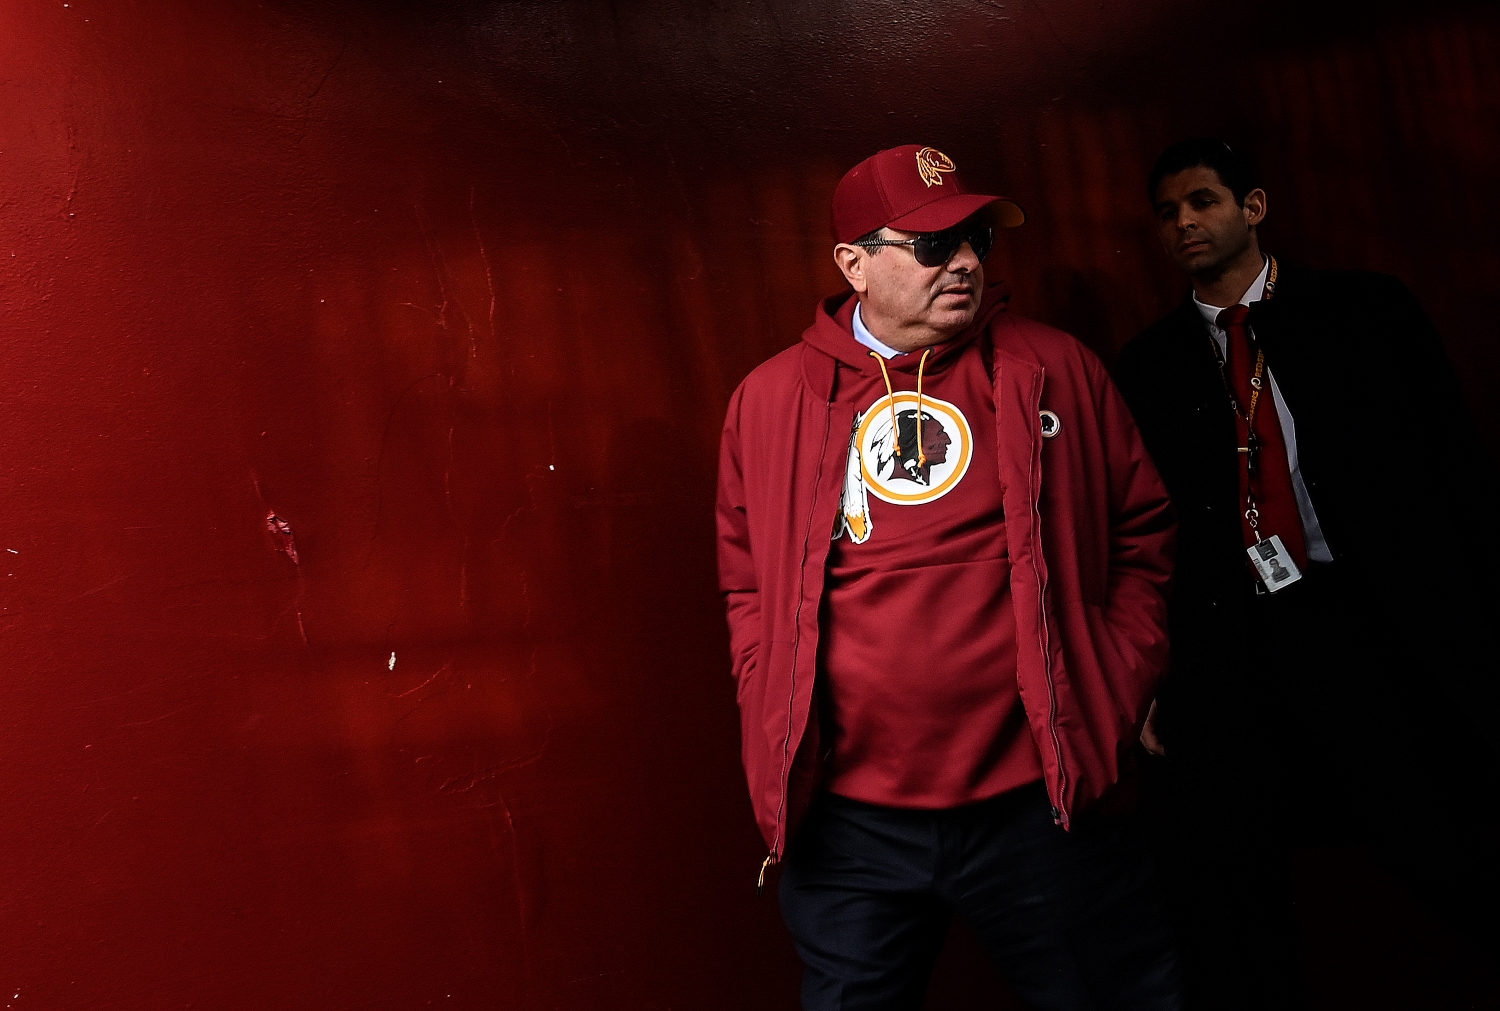 Washington Football Team owner Dan Snyder heads out to the field before a game.